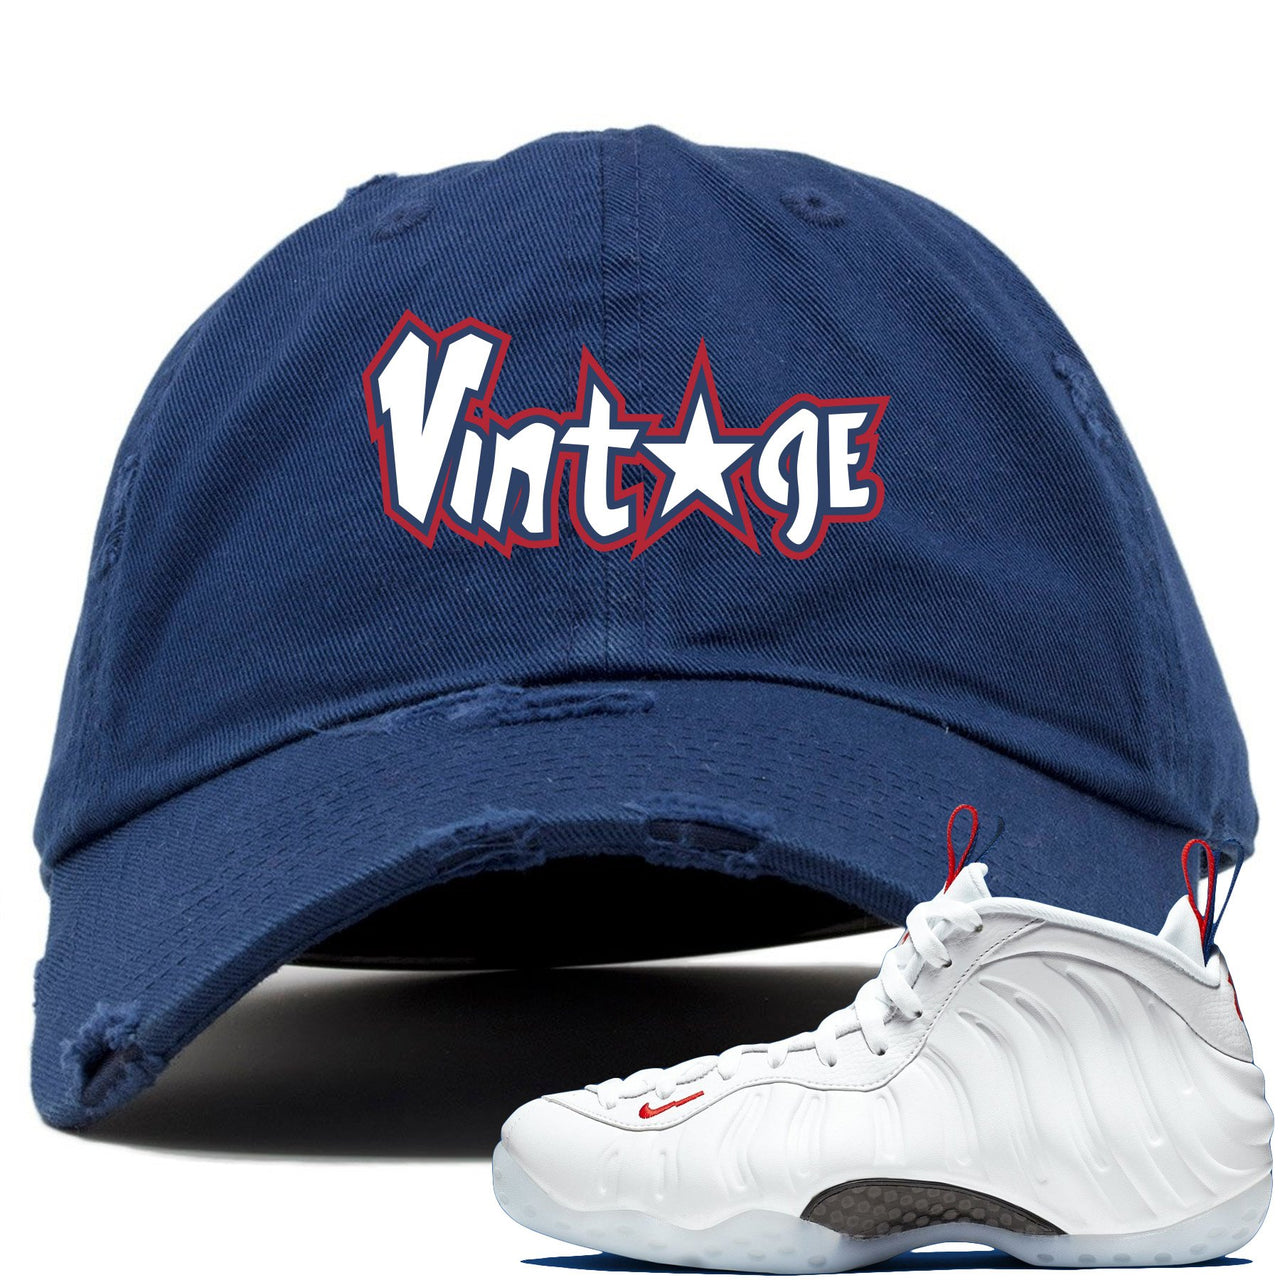 USA One Foams Distressed Dad Hat | Vintage Star, Navy